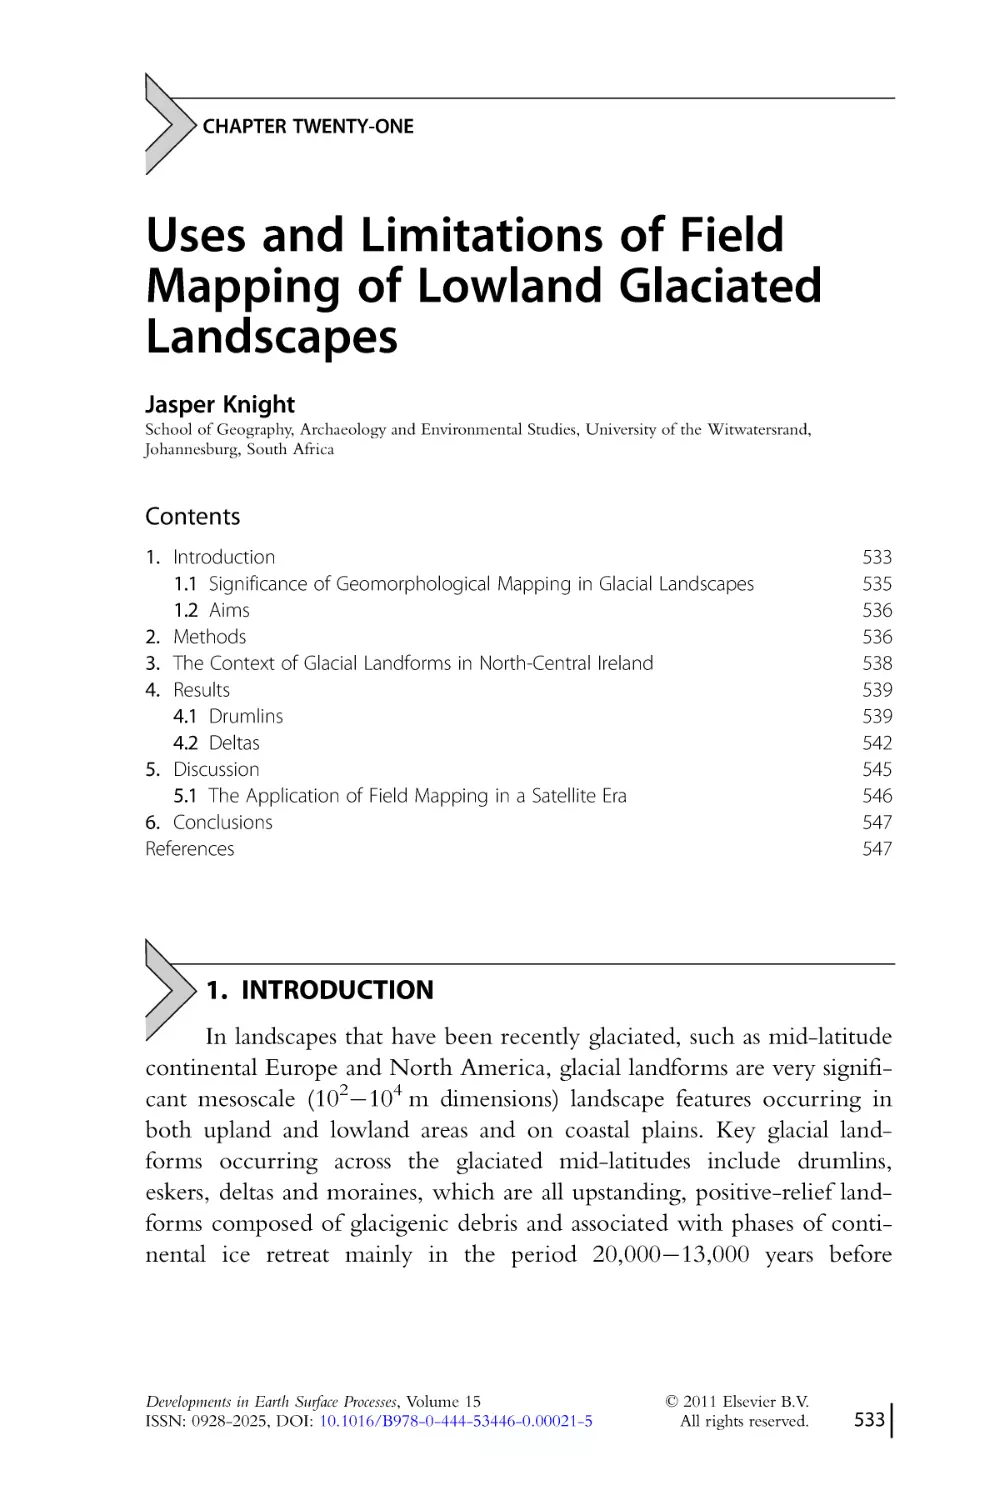 CHAPTER TWENTY-ONE.
Uses and Limitations of Field
Mapping of Lowland Glaciated
Landscapes
1. Introduction